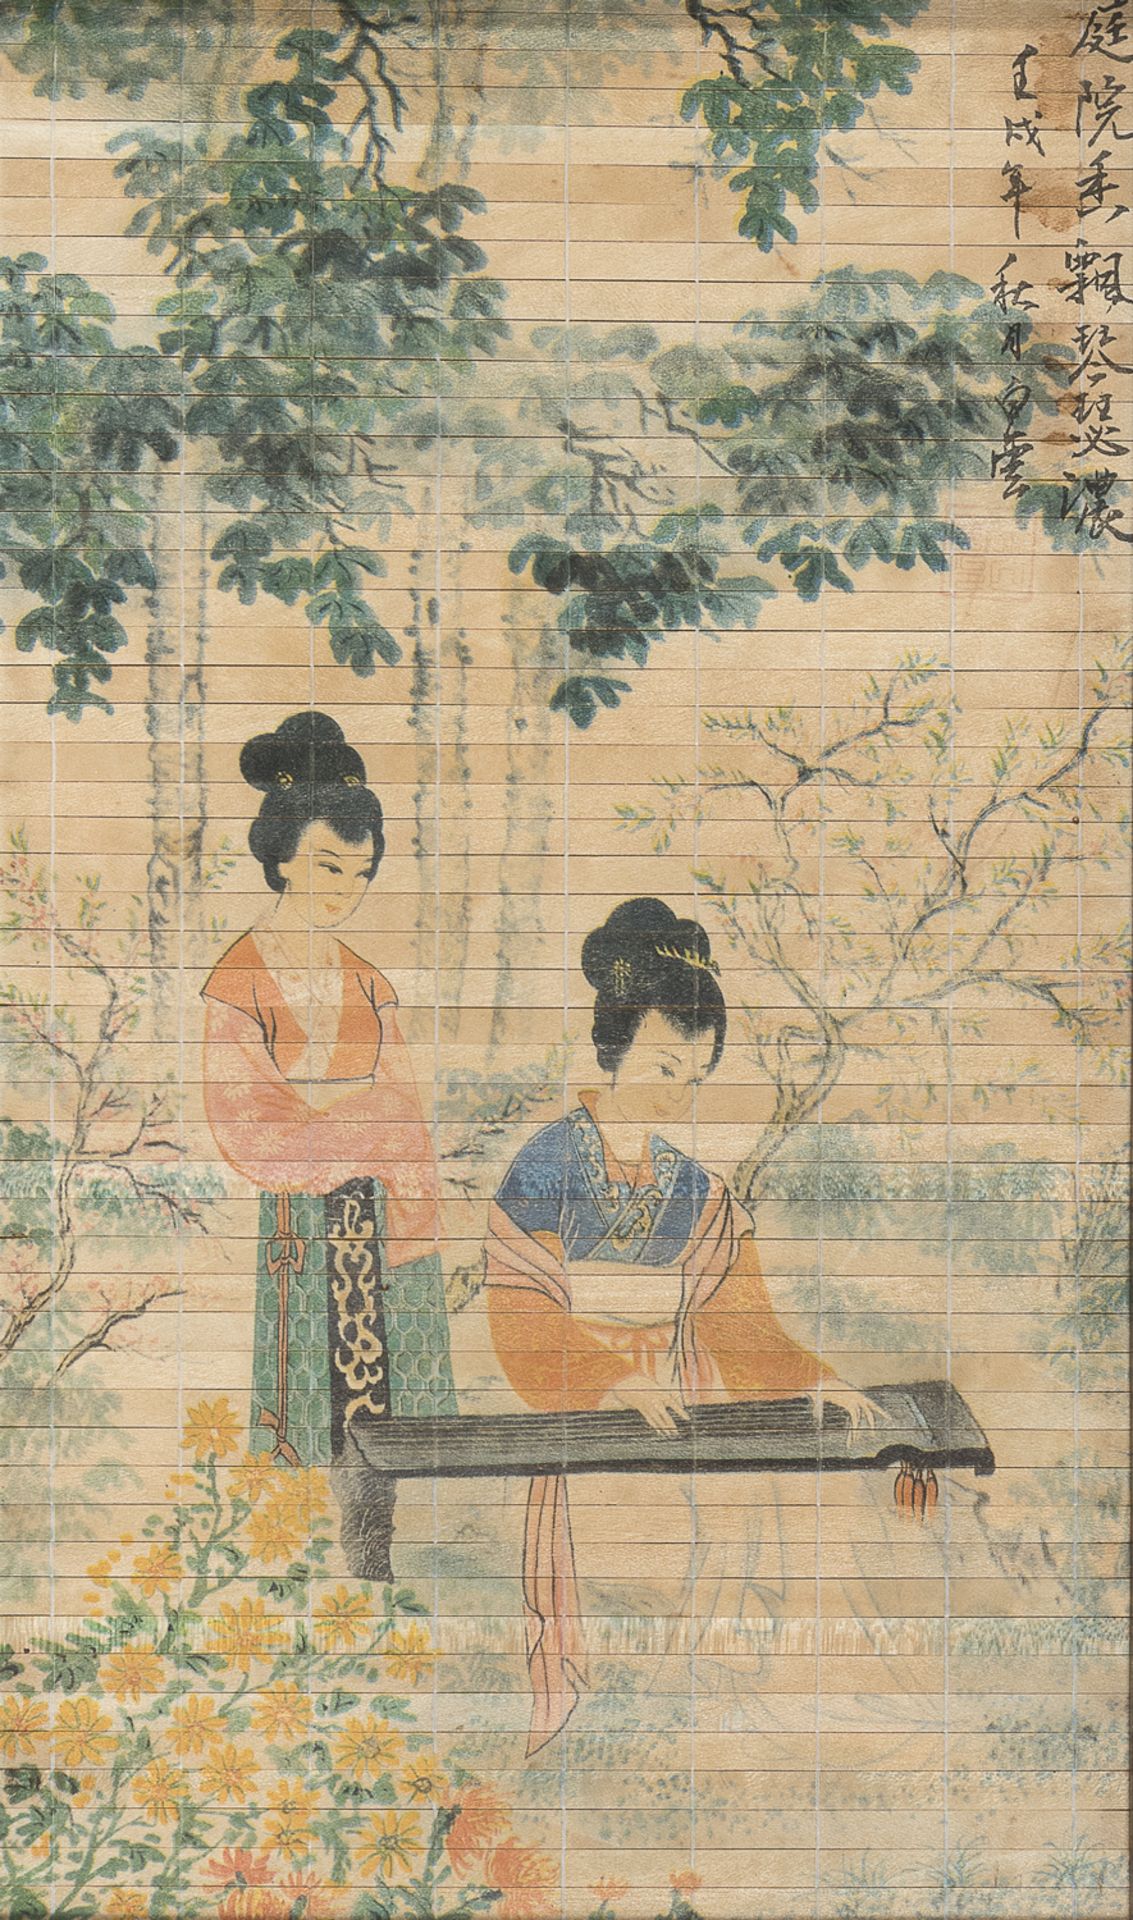 CHINESE SCHOOL 20TH CENTURY. REPRESENTATION OF MUSICAL VIRTUE. PRINT ON BAMBOO TILES.